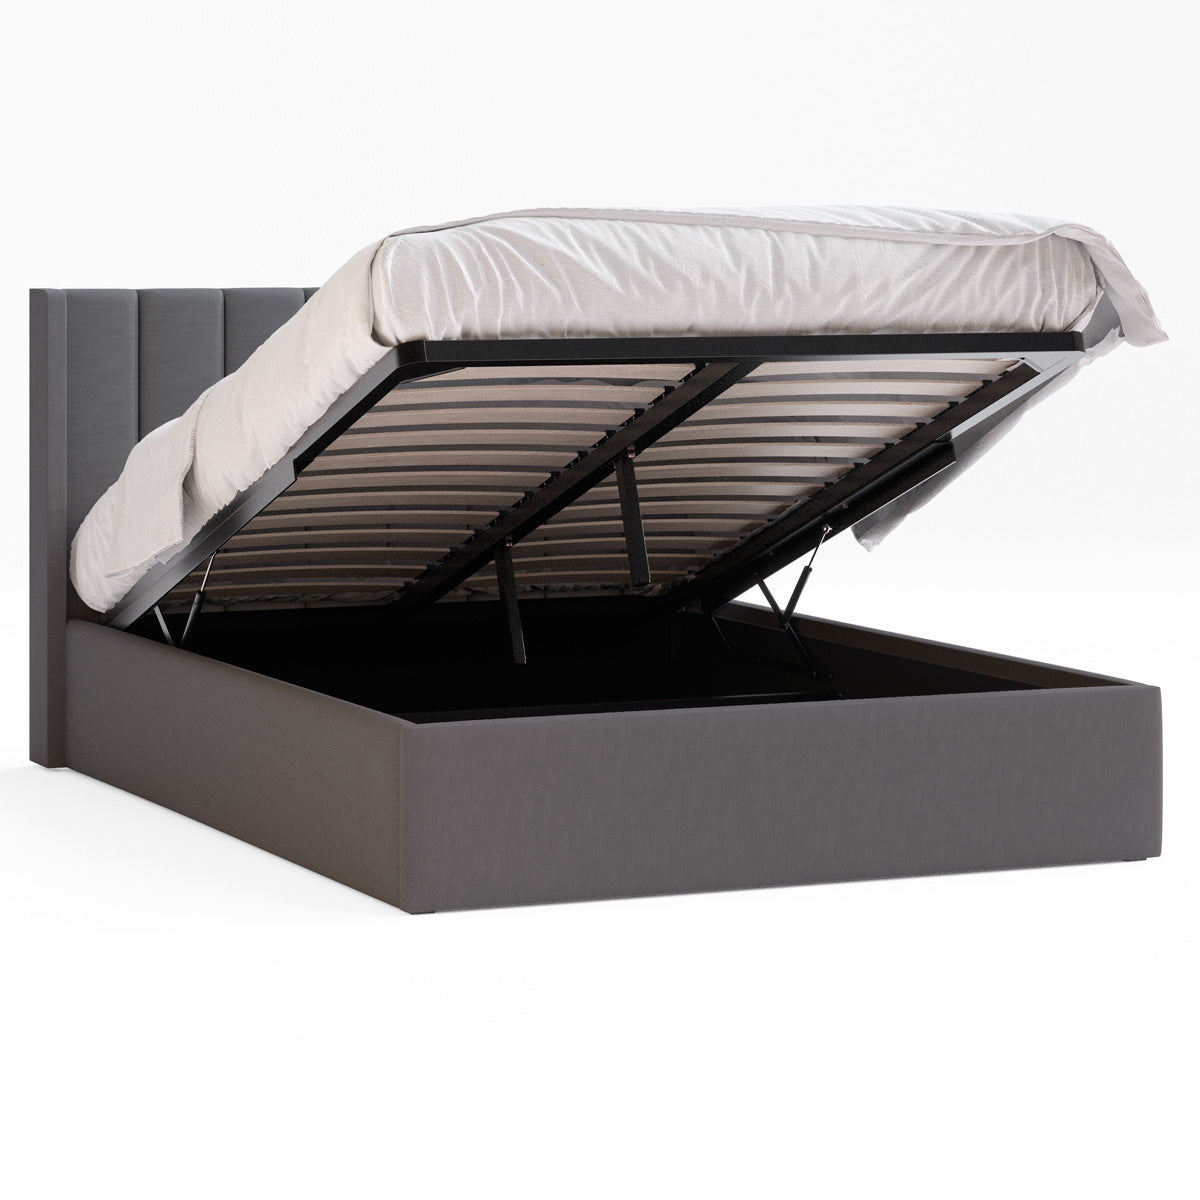 Emilie Gas Lift Storage Wing Bed Frame (Charcoal Fabric)